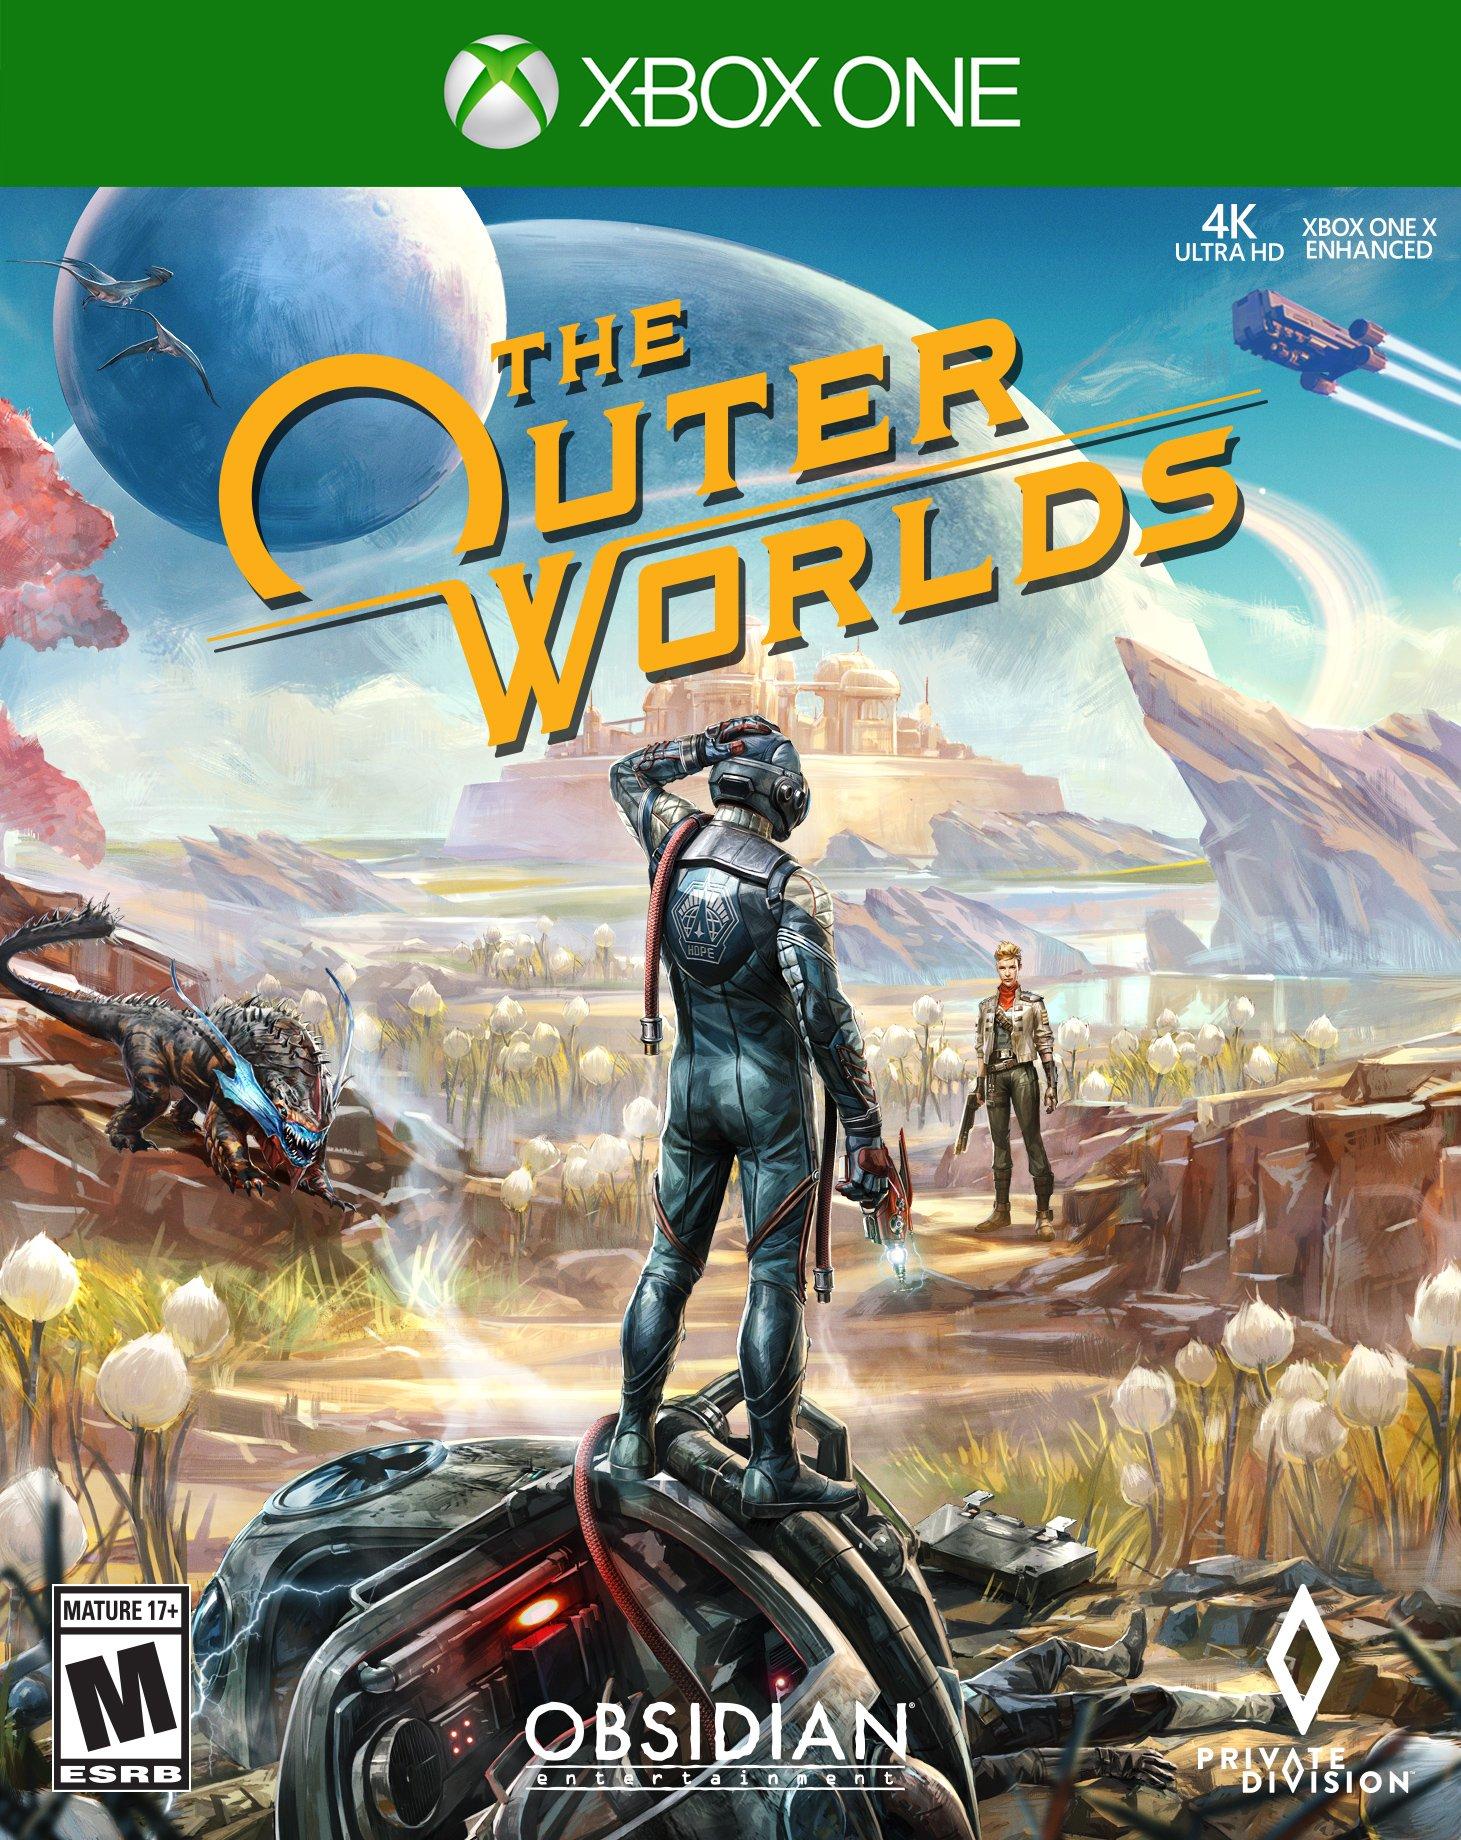 The Outer Worlds 2 PlayStation 5: Obsidian Sequel Is Xbox Exclusive